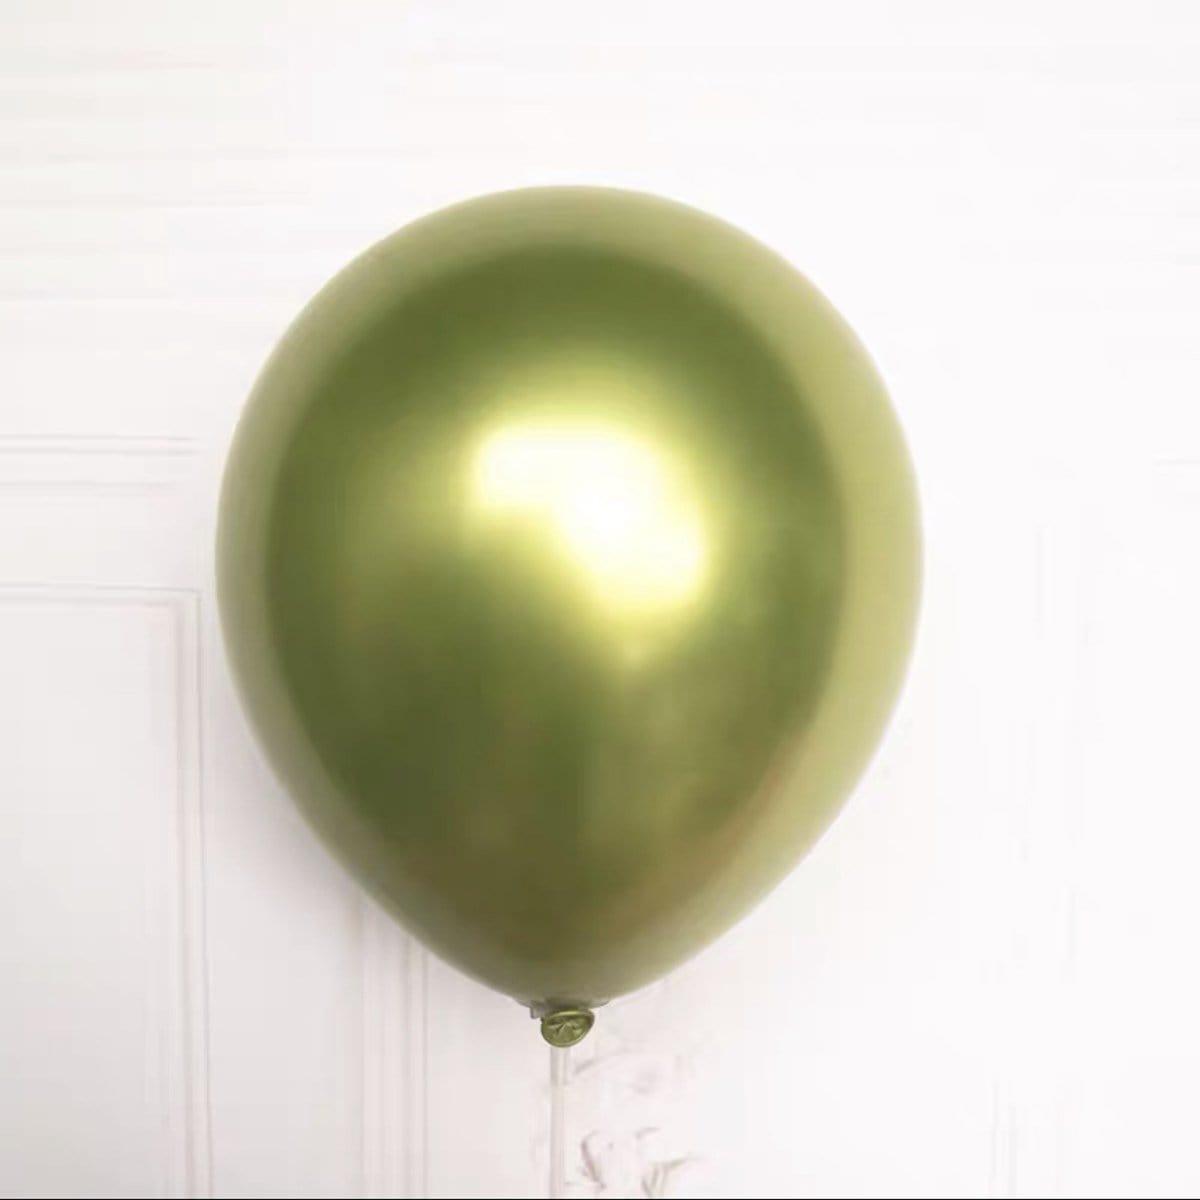 Buy Balloons Light Green Latex Balloon 5 Inches, Chrome Collection, 100 Count sold at Party Expert